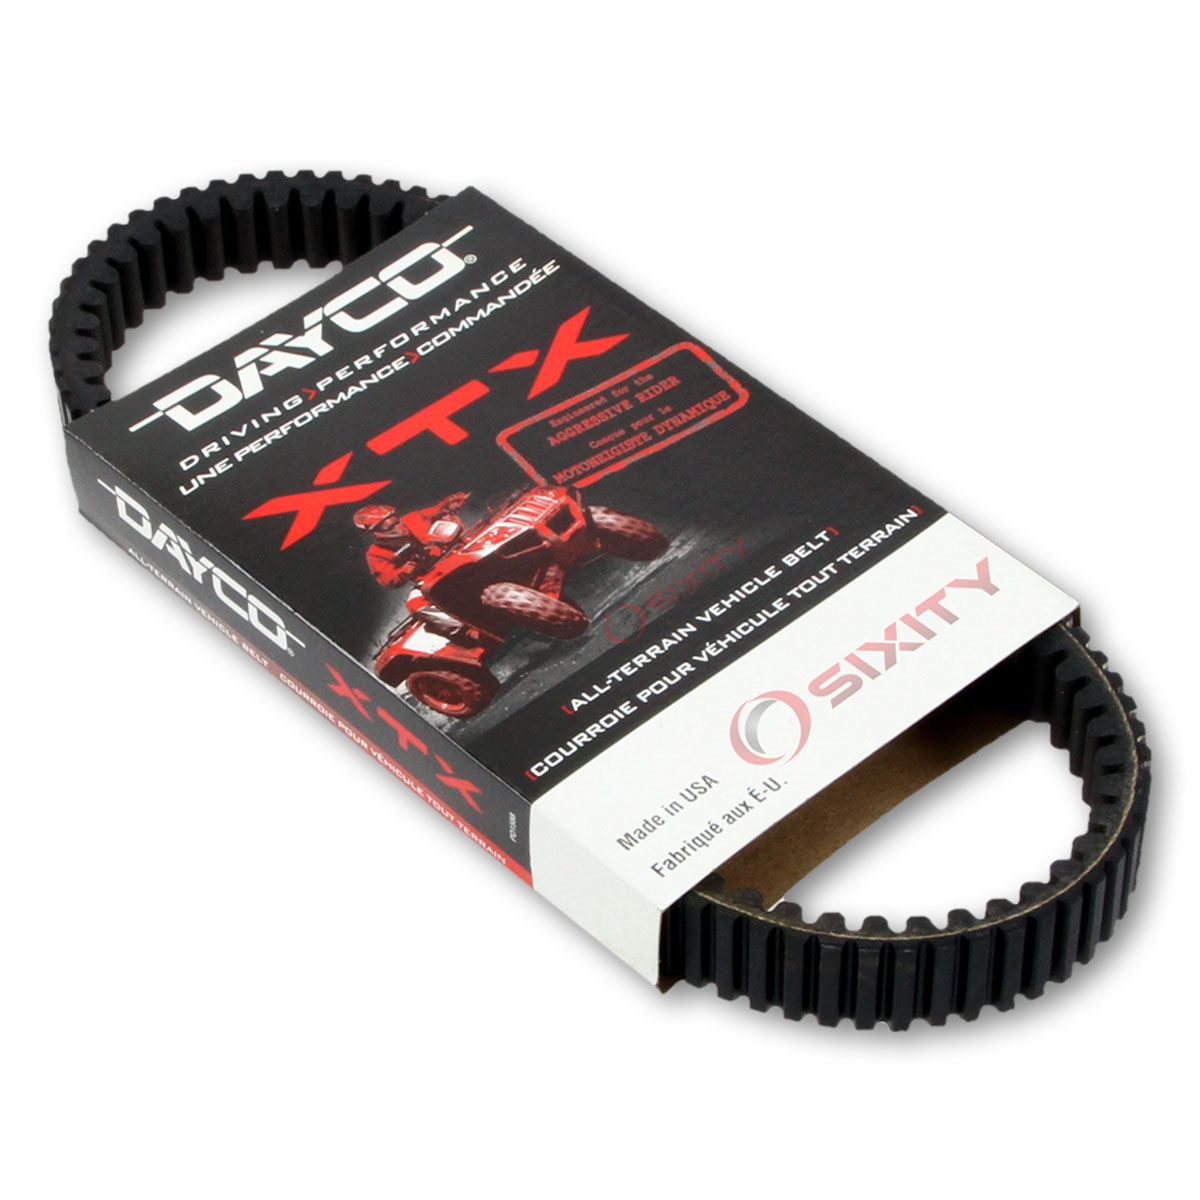 Dayco XTX Drive Belt for 2011 Arctic Cat 550 TRV Cruiser - Extreme Torque